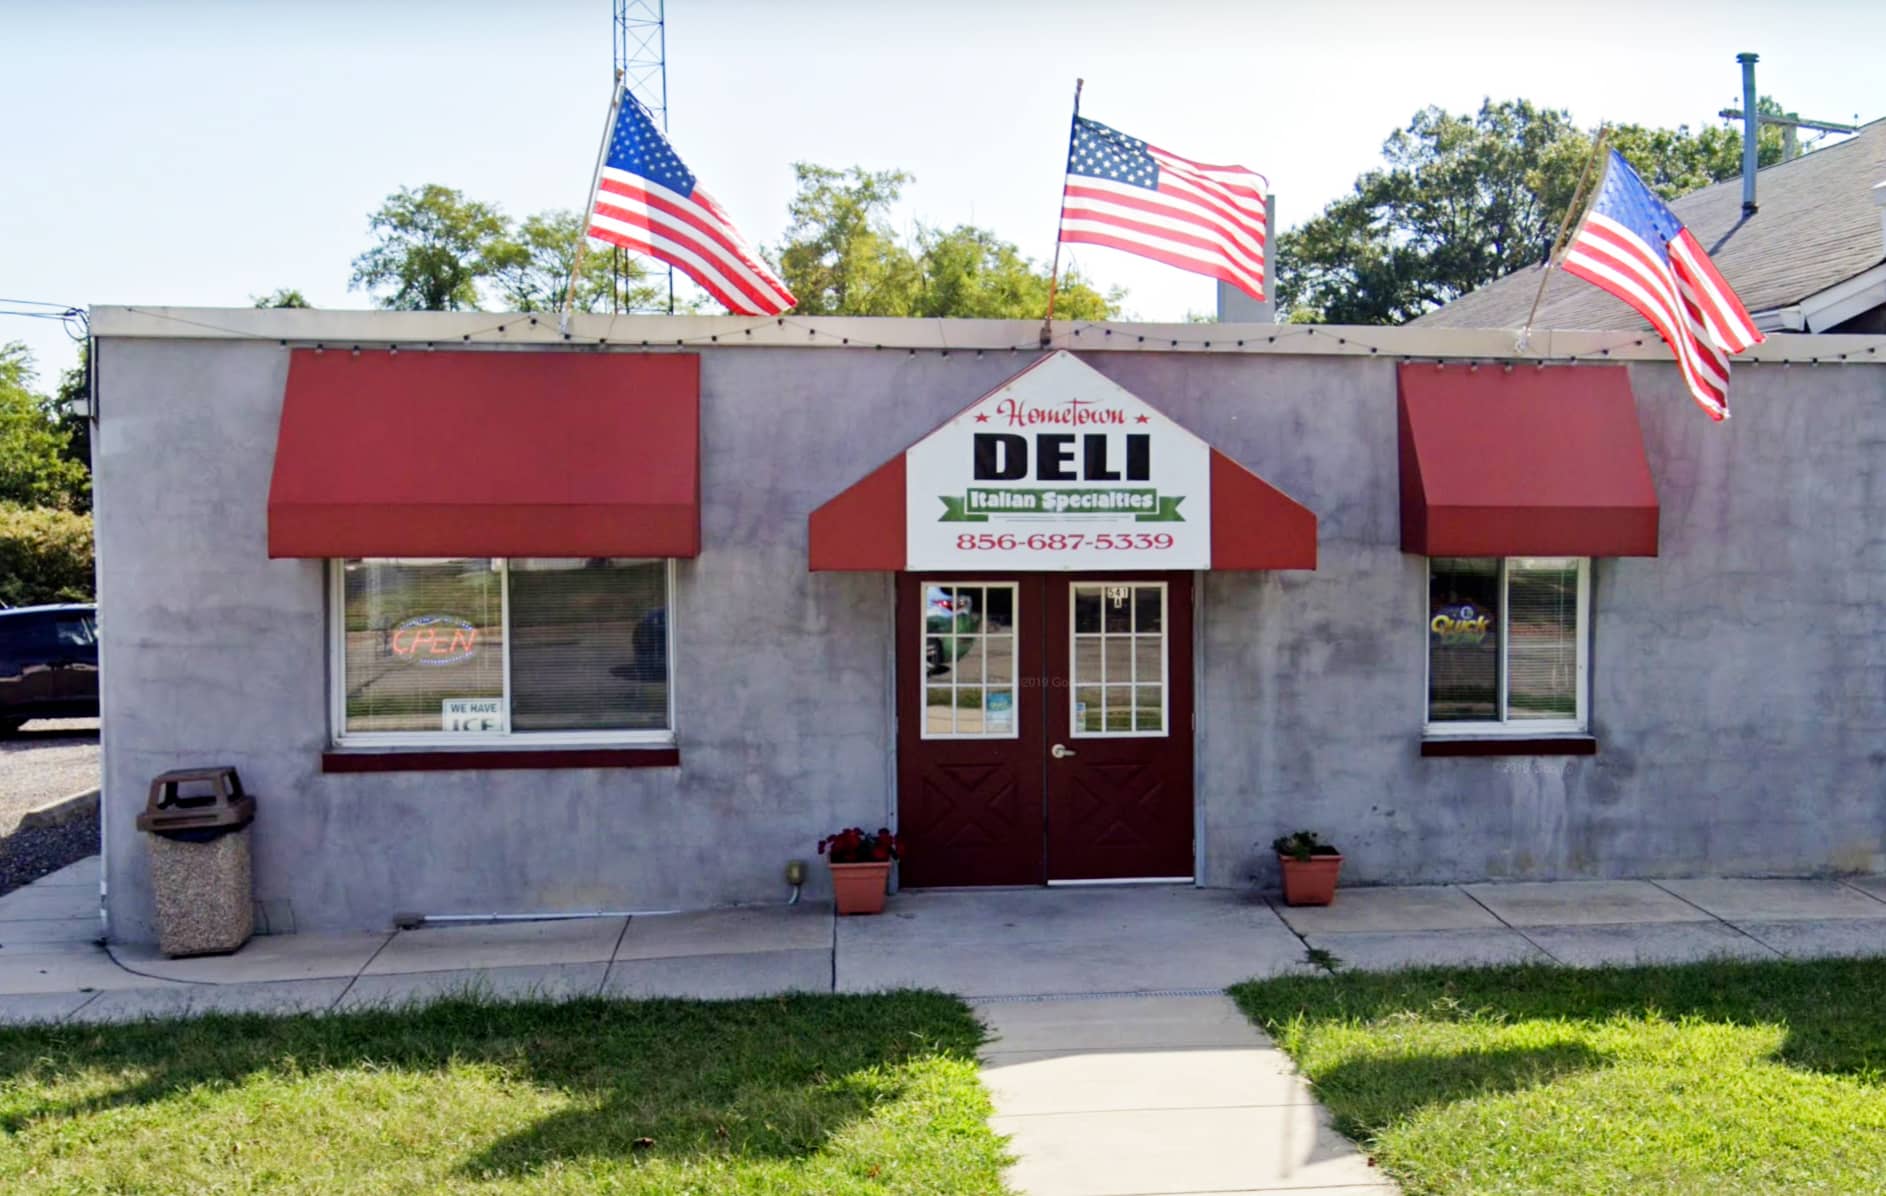 $100 Million New Jersey deli firm delisted from OTC market